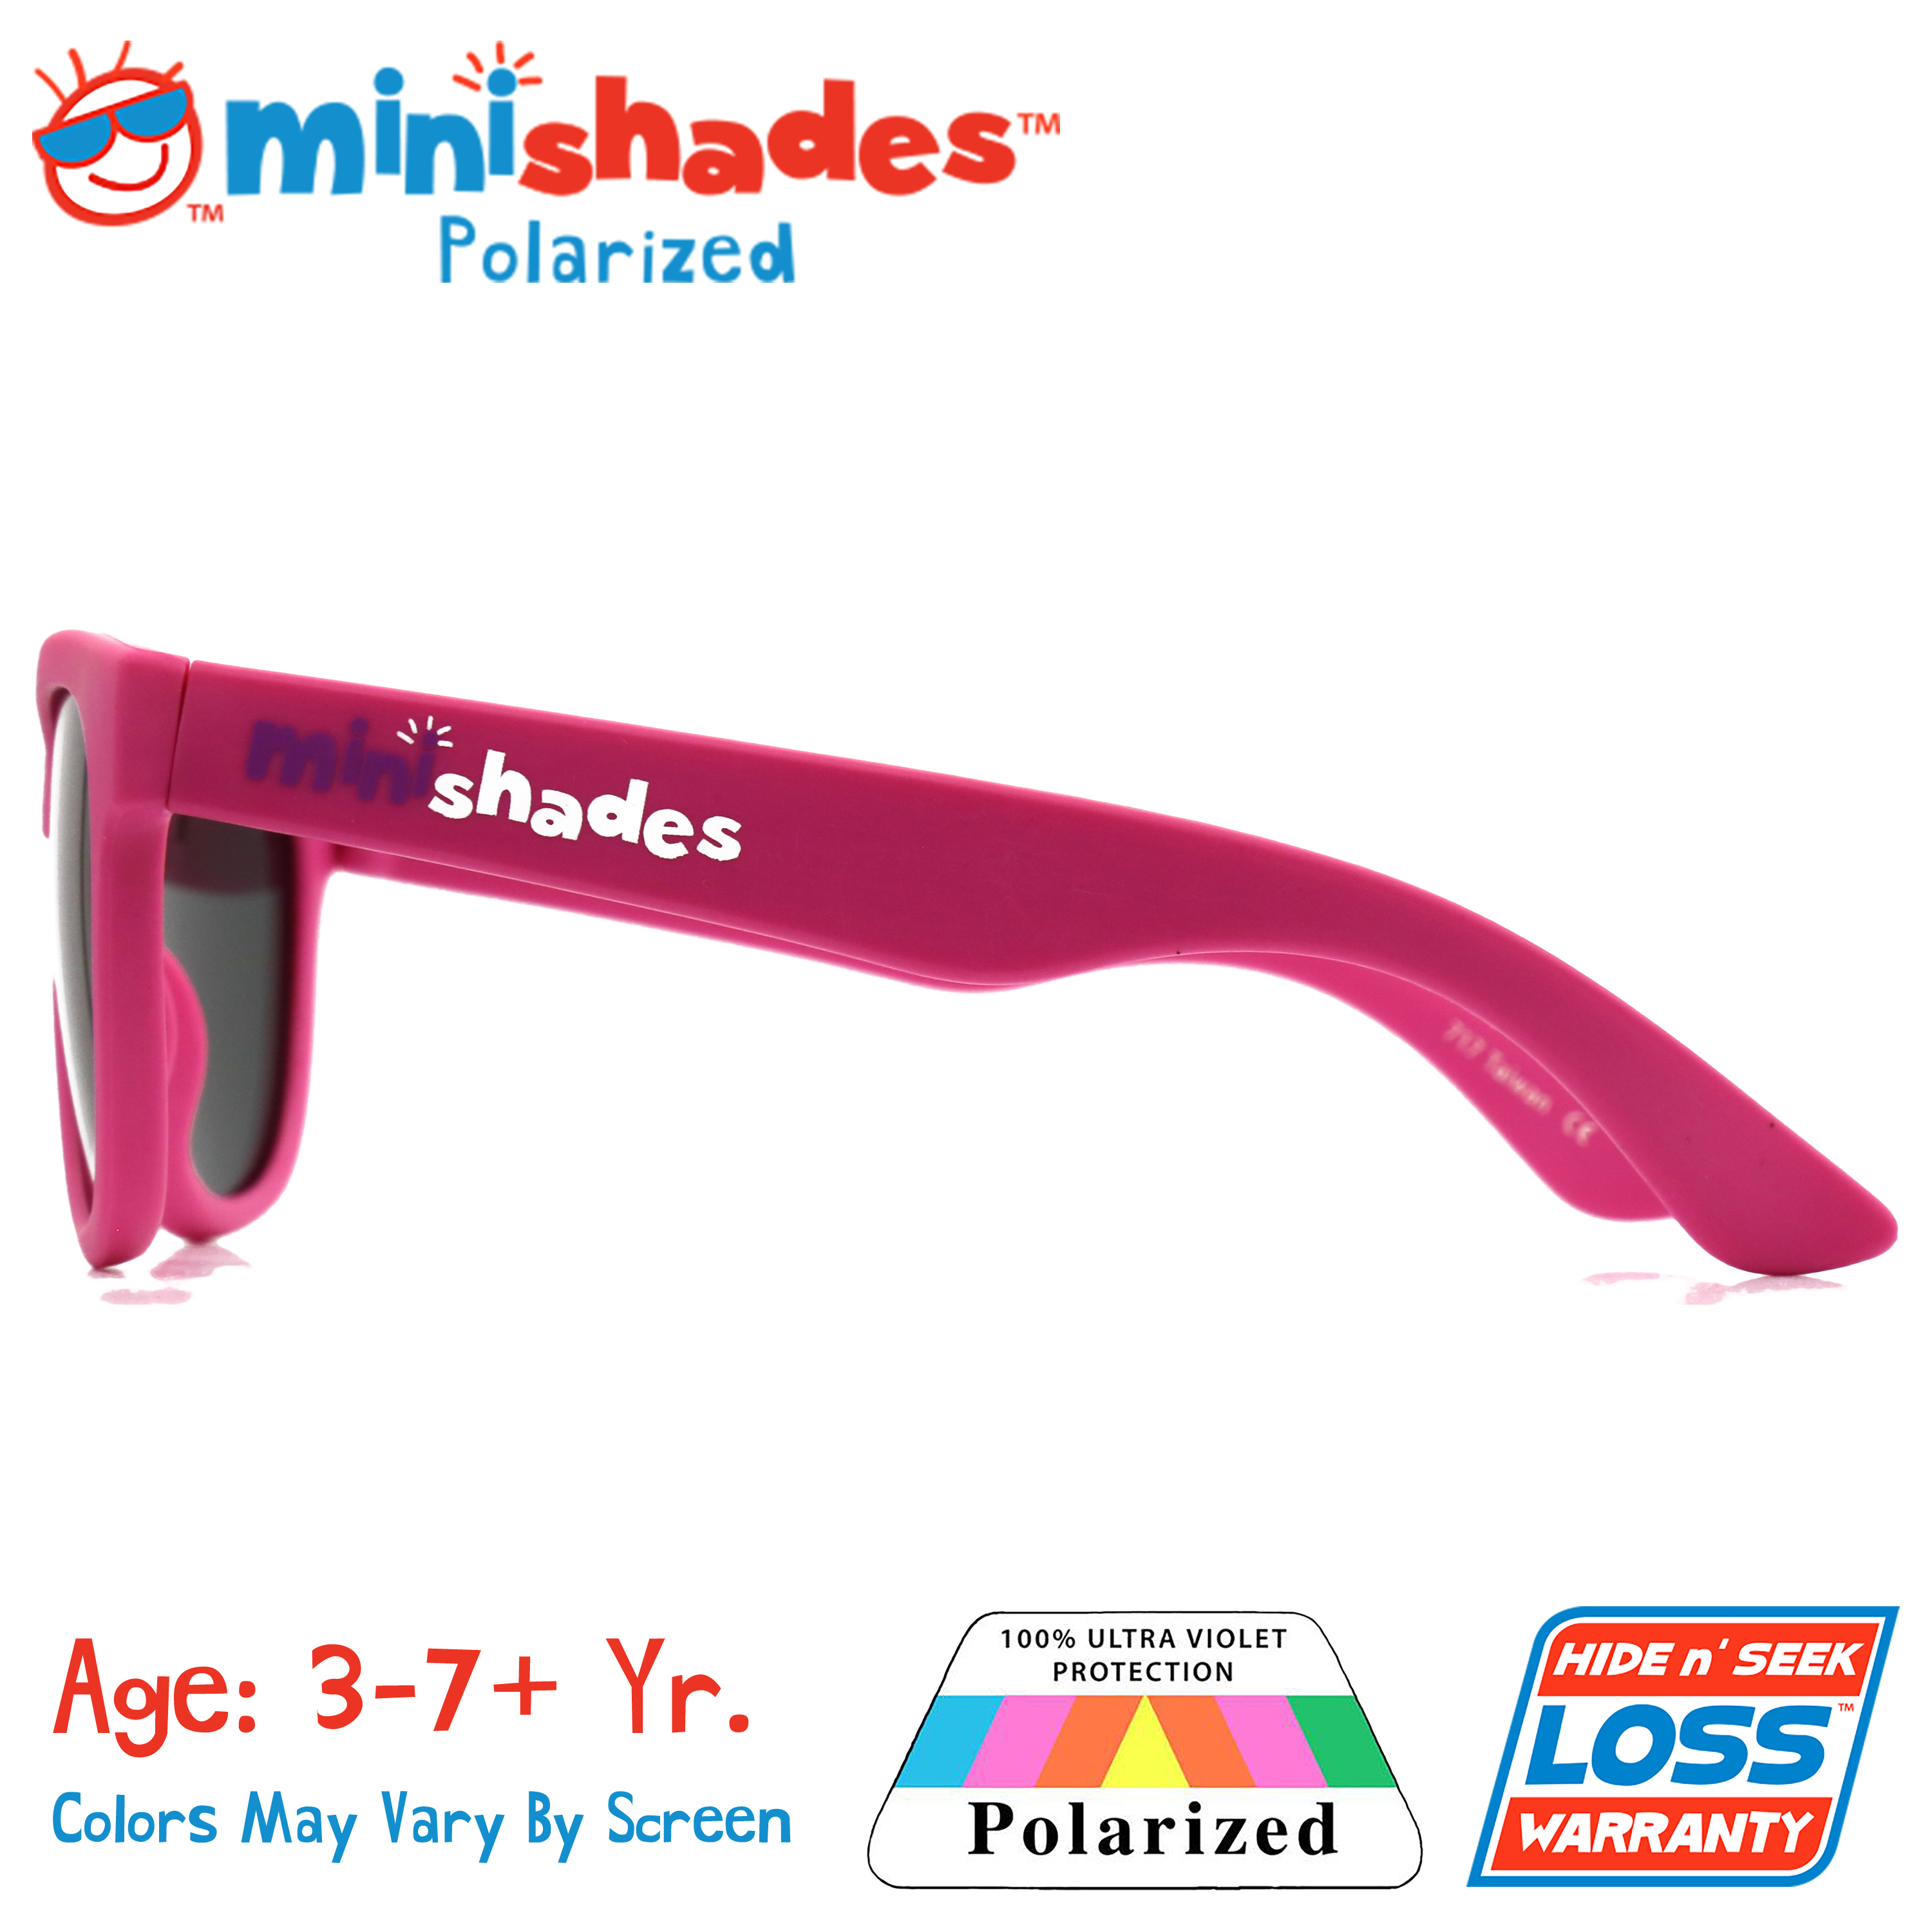 Minishades Polarized: Flexible Kids Sunglasses - Hot Pink |UVA/UVB| Hide n' Seek Replacement | Age: 3-7+Yr. - image 3 of 4